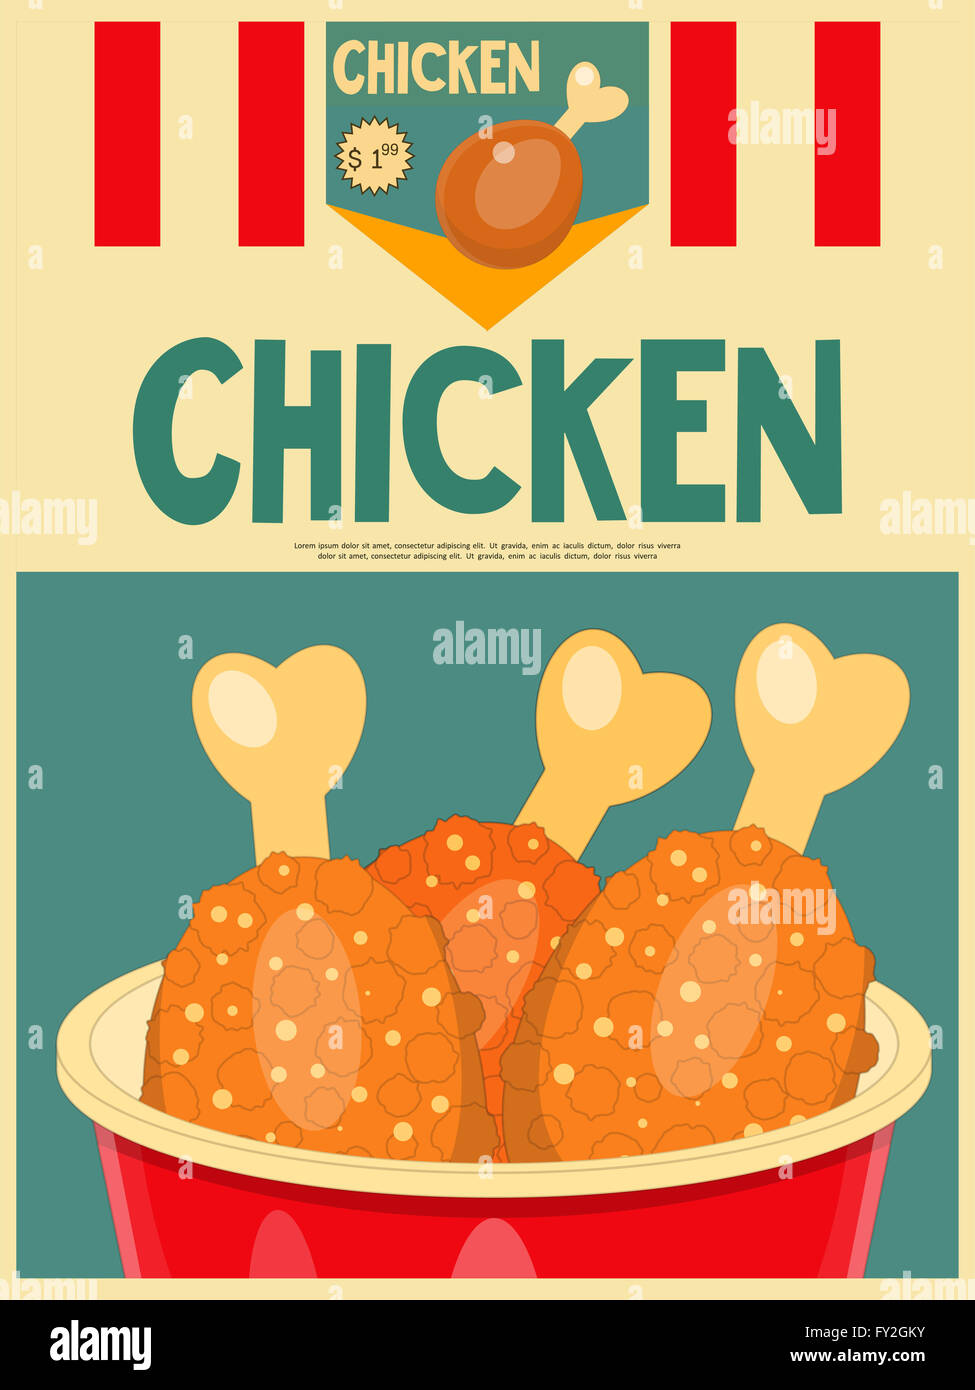 Fried Chicken Poster Menu In Retro Style Illustration Stock Photo Alamy